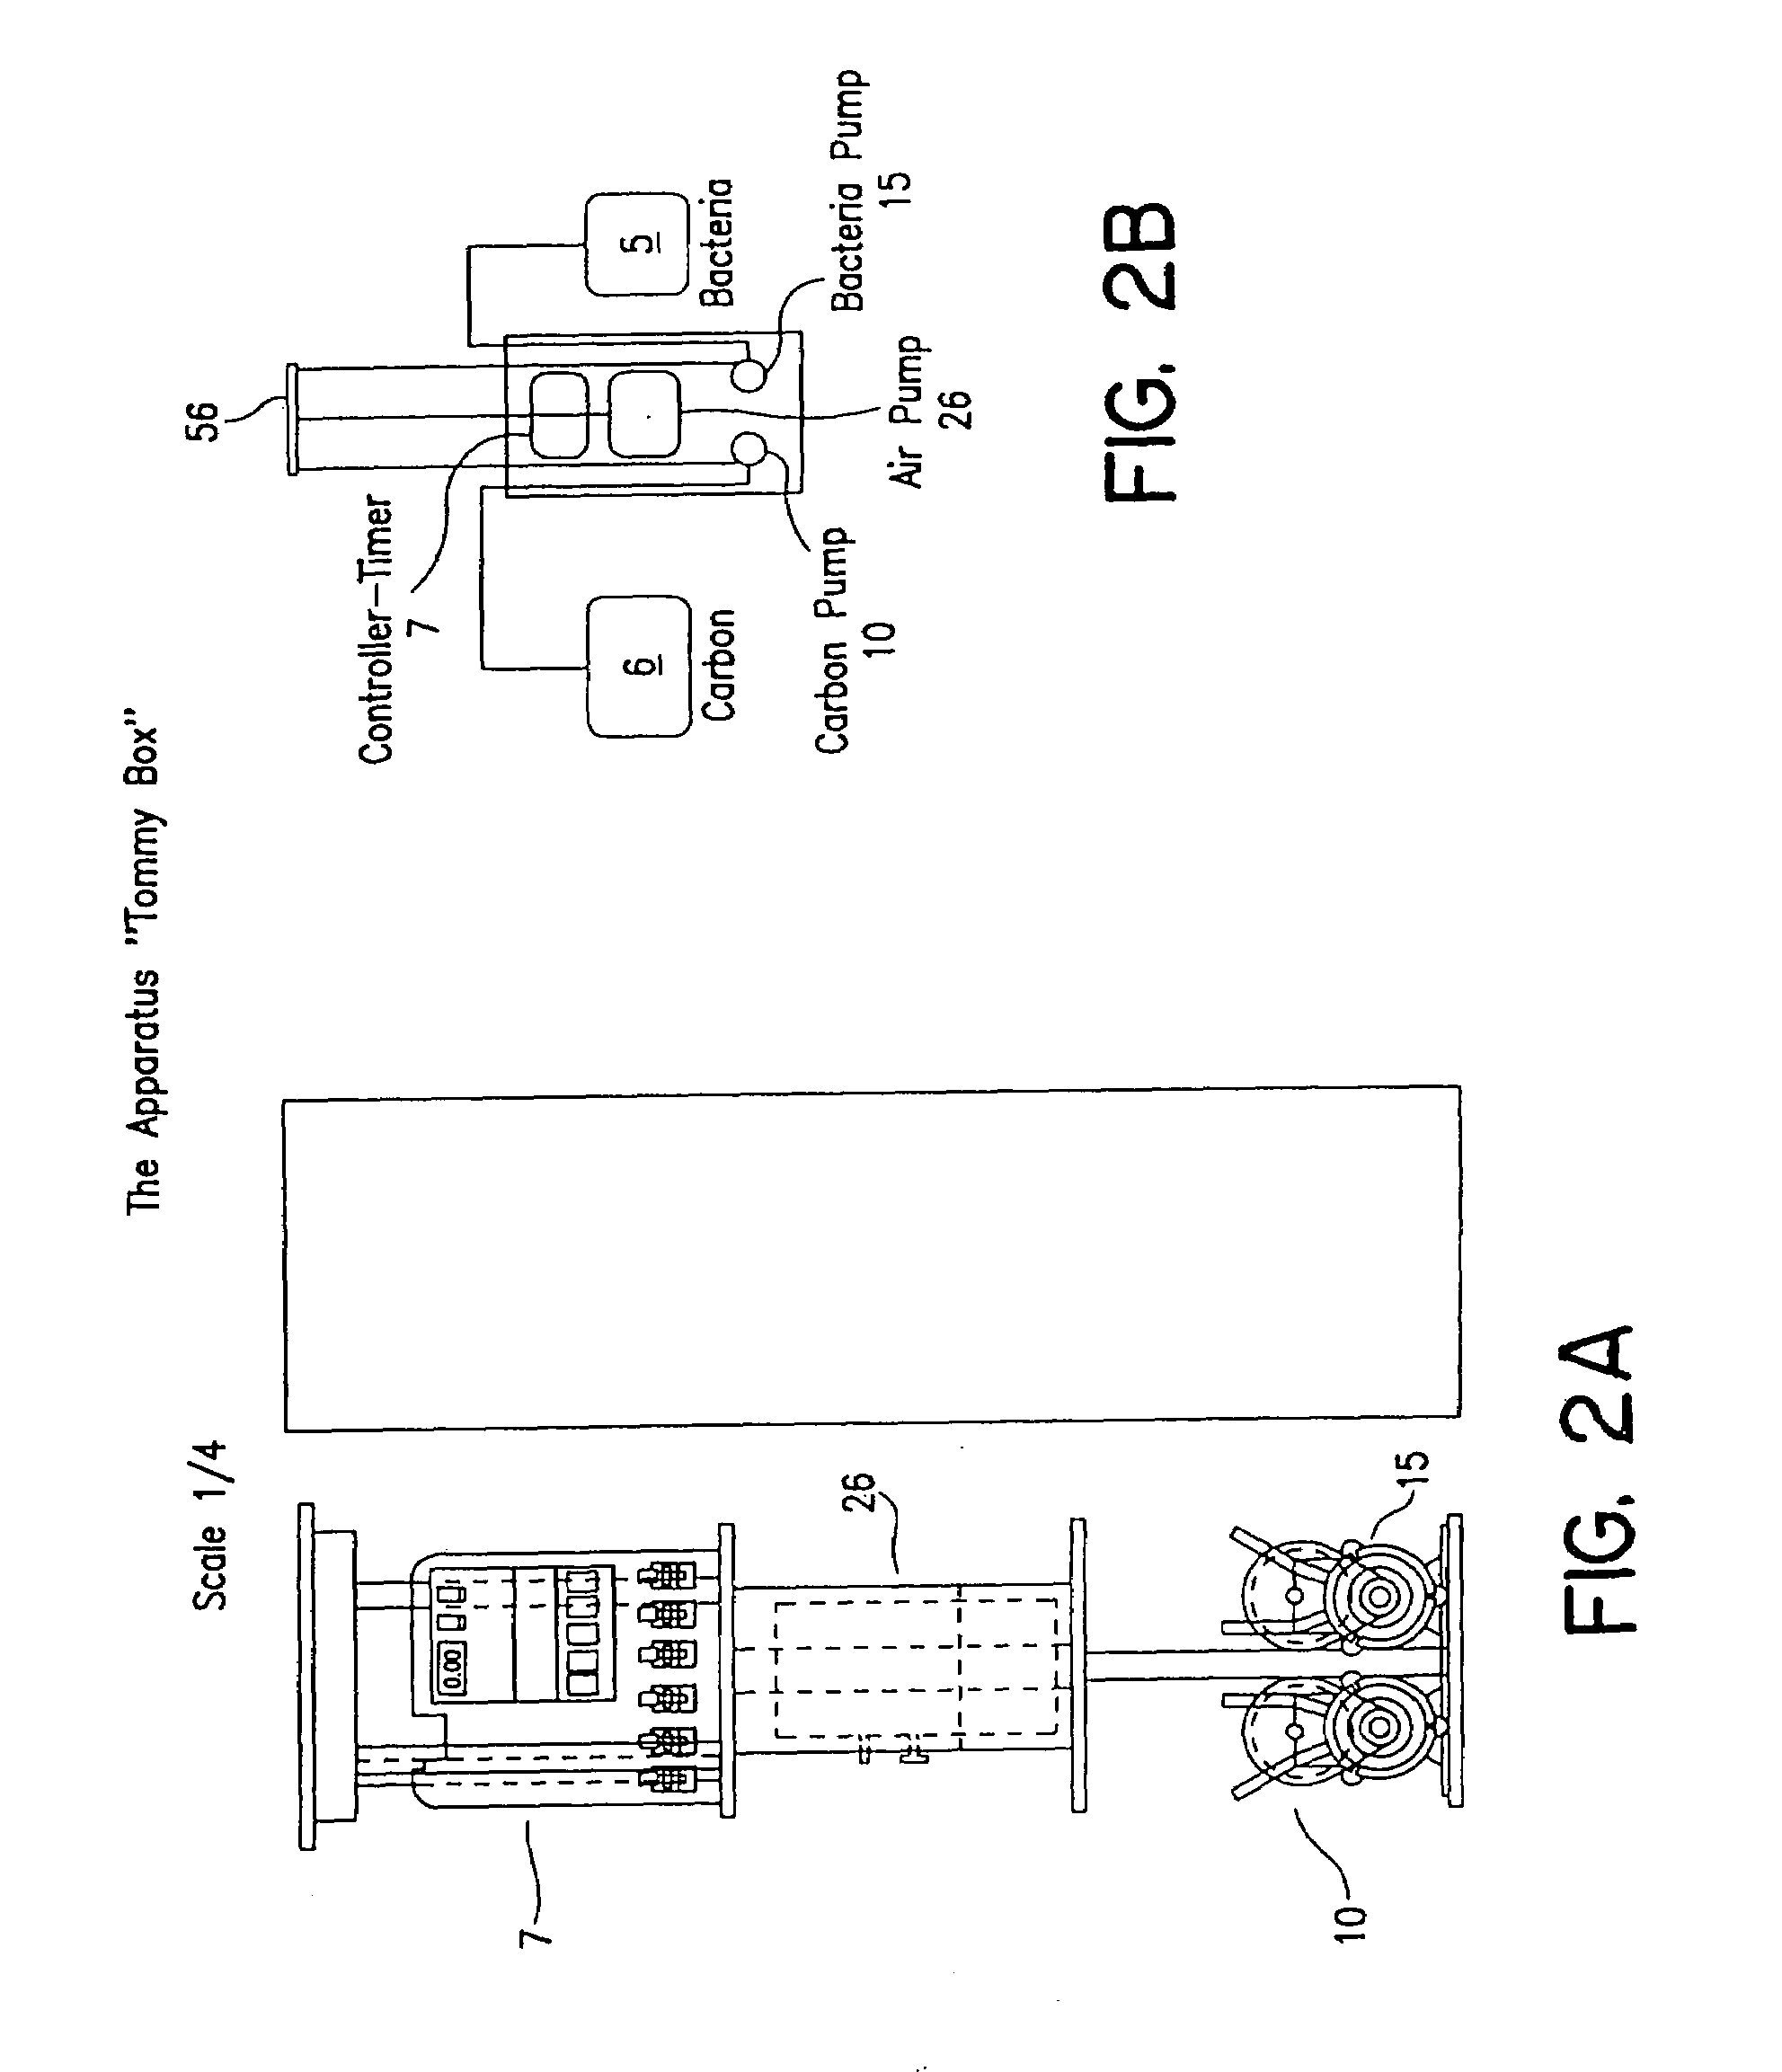 Process and apparatus for waste water treatment